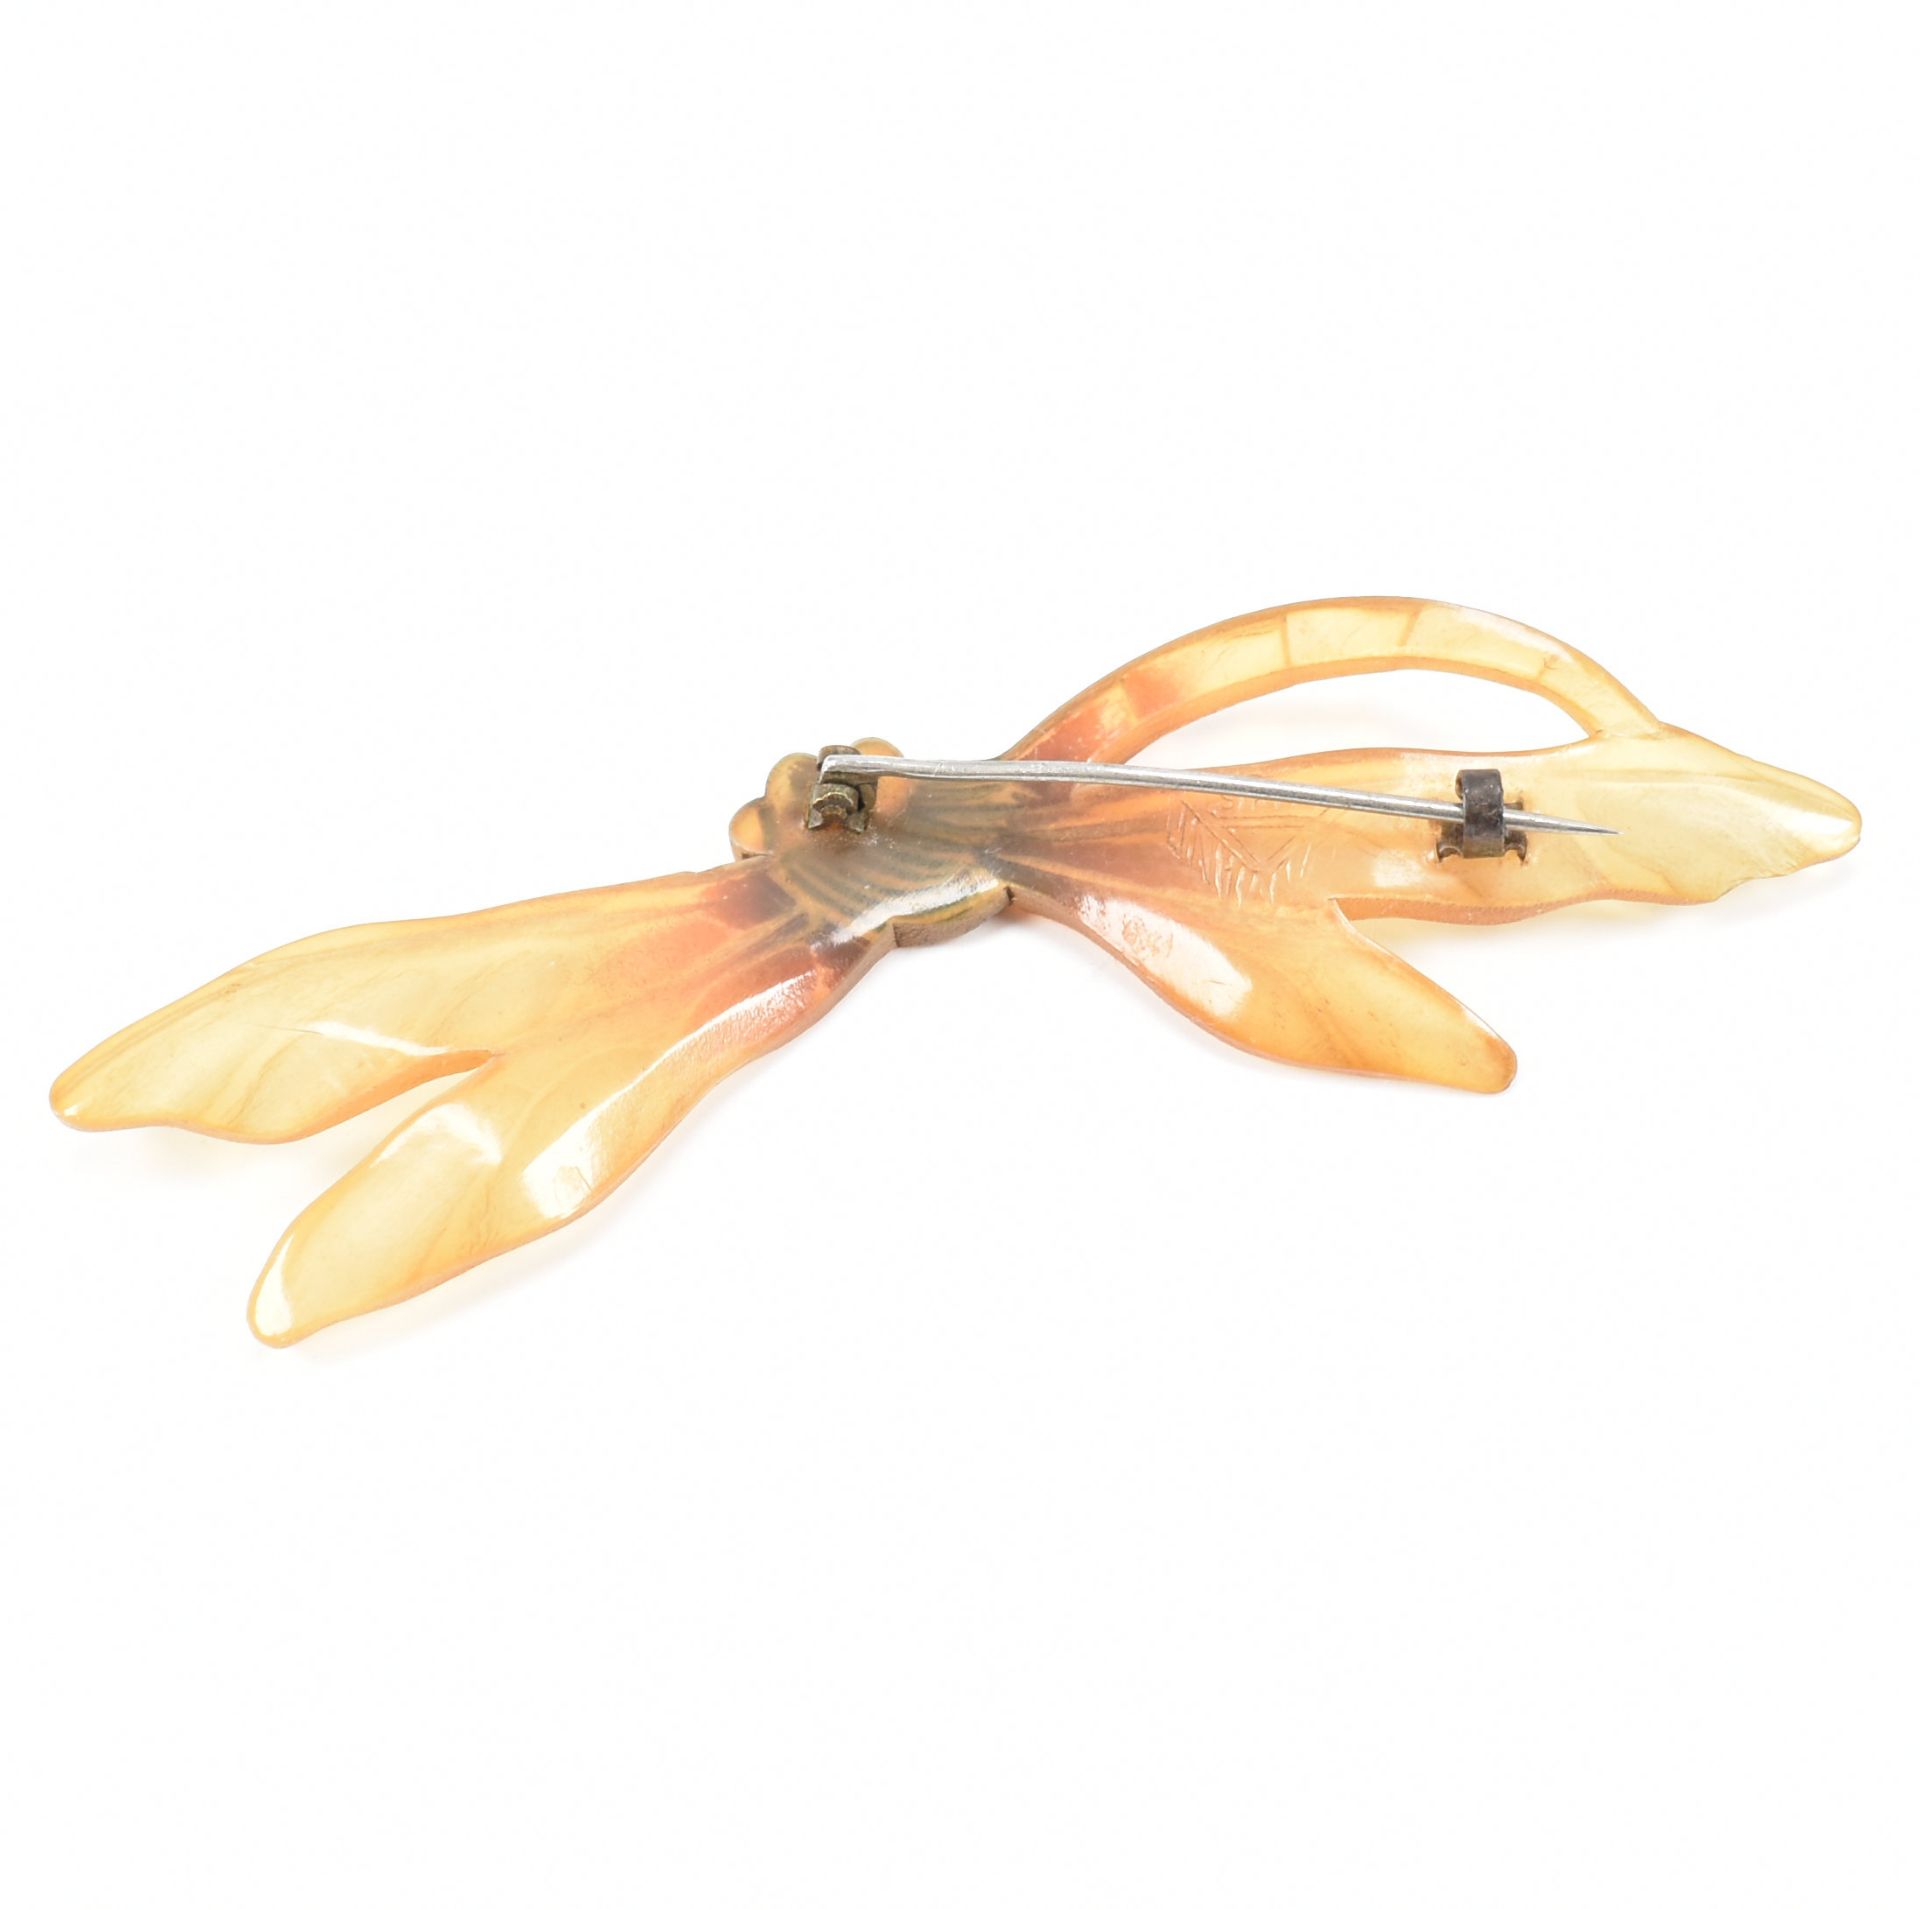 1920S FRENCH ART NOUVEAU HORN DRAGONFLY BROOCH PIN - Image 2 of 6